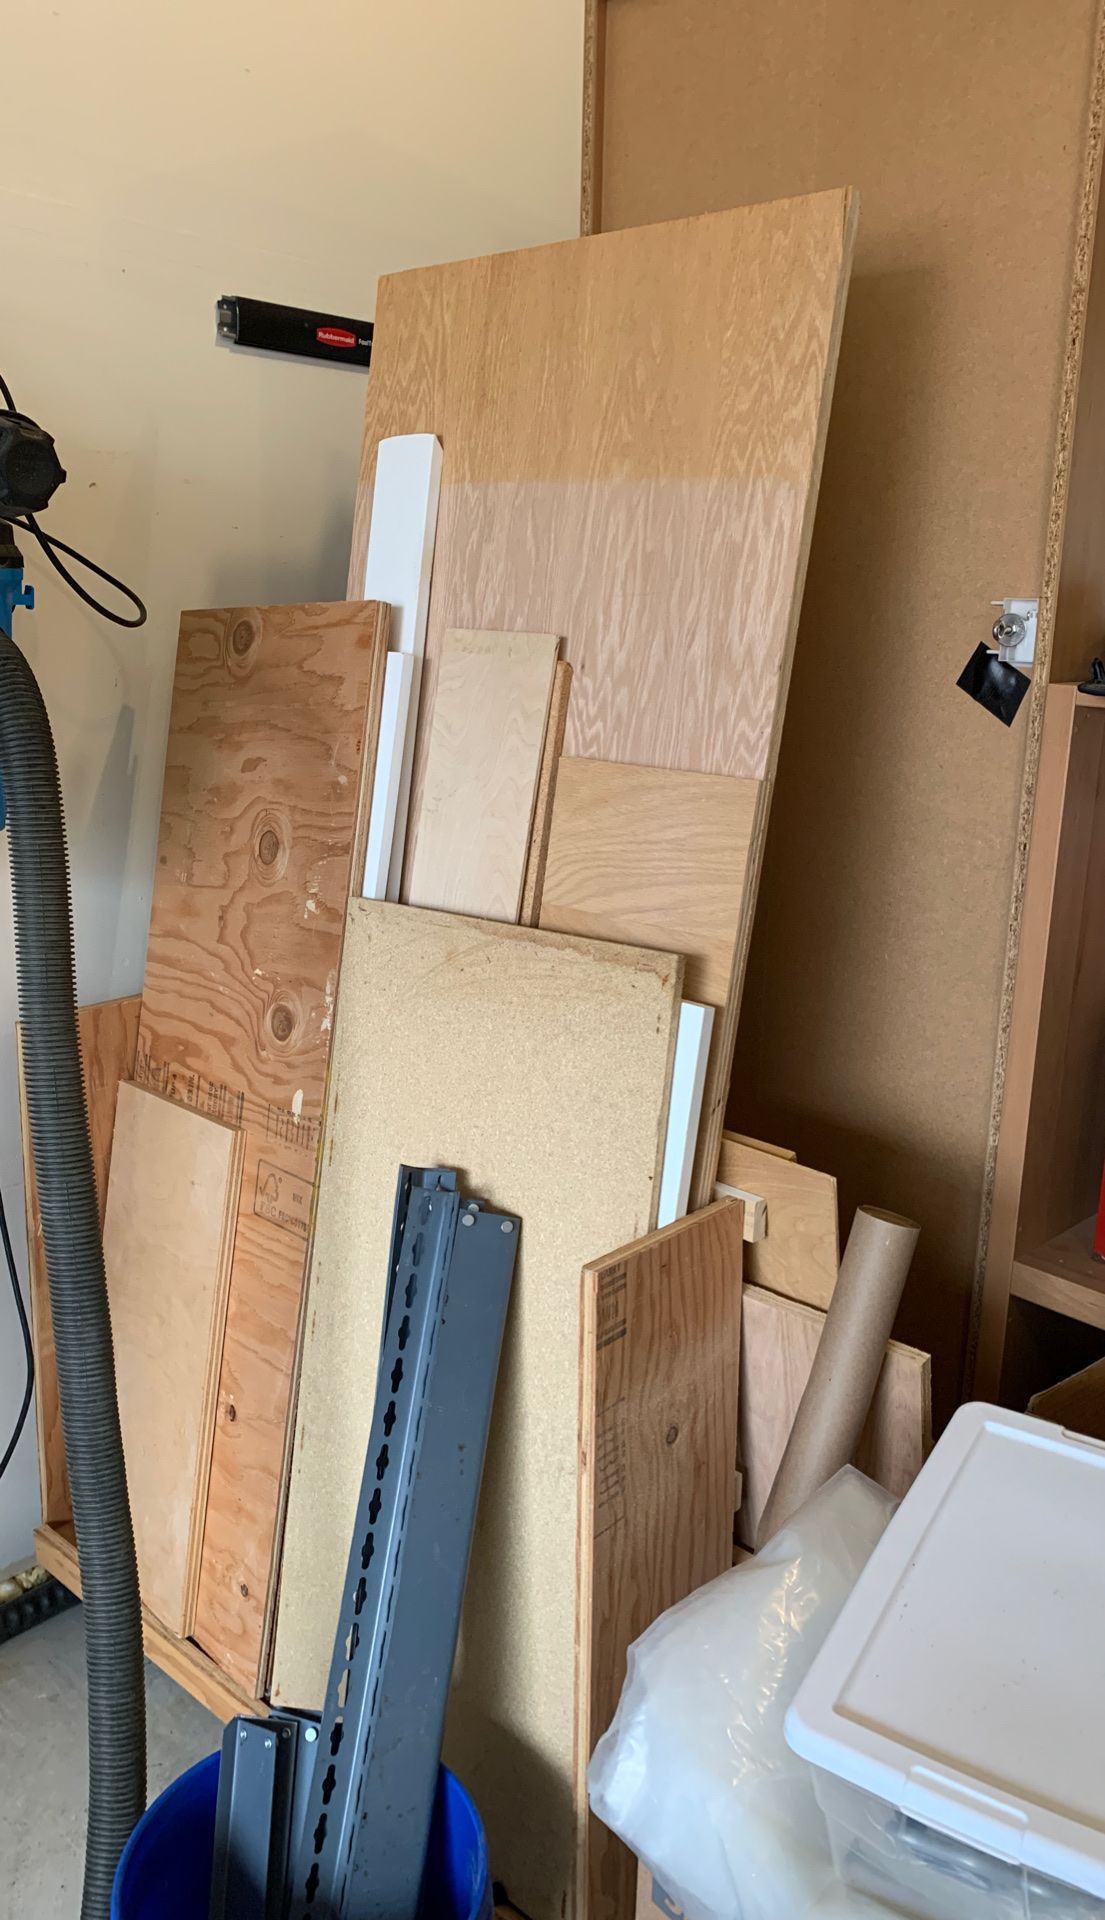 Free wood scraps and boards